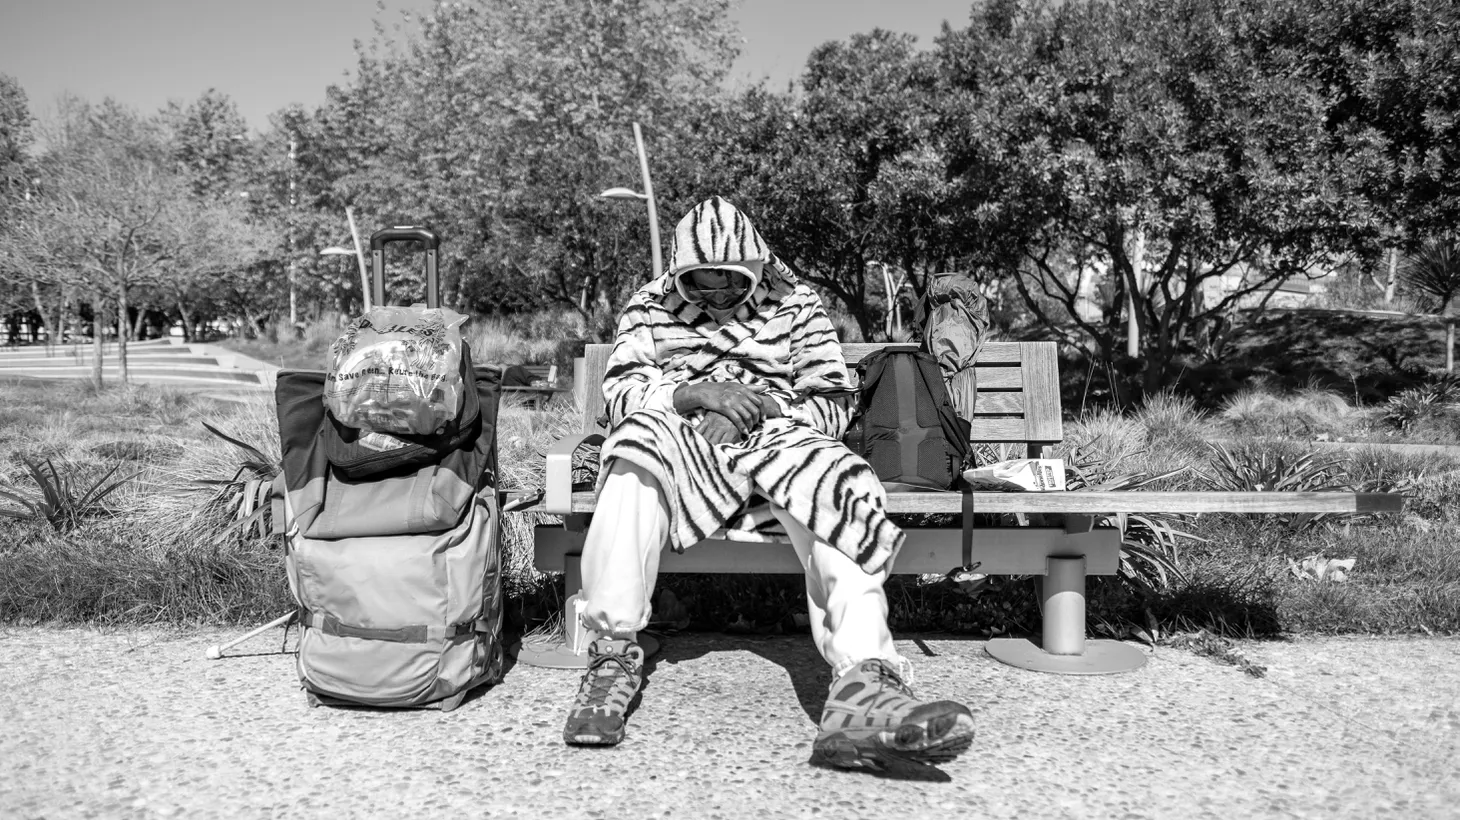 An unhoused man sits with his belongings on a bench at Tongva Park in Santa Monica, February 25, 2022. “Lead Me Home” is a new Oscar-nominated short documentary about several people living on the streets, including in Los Angeles County.